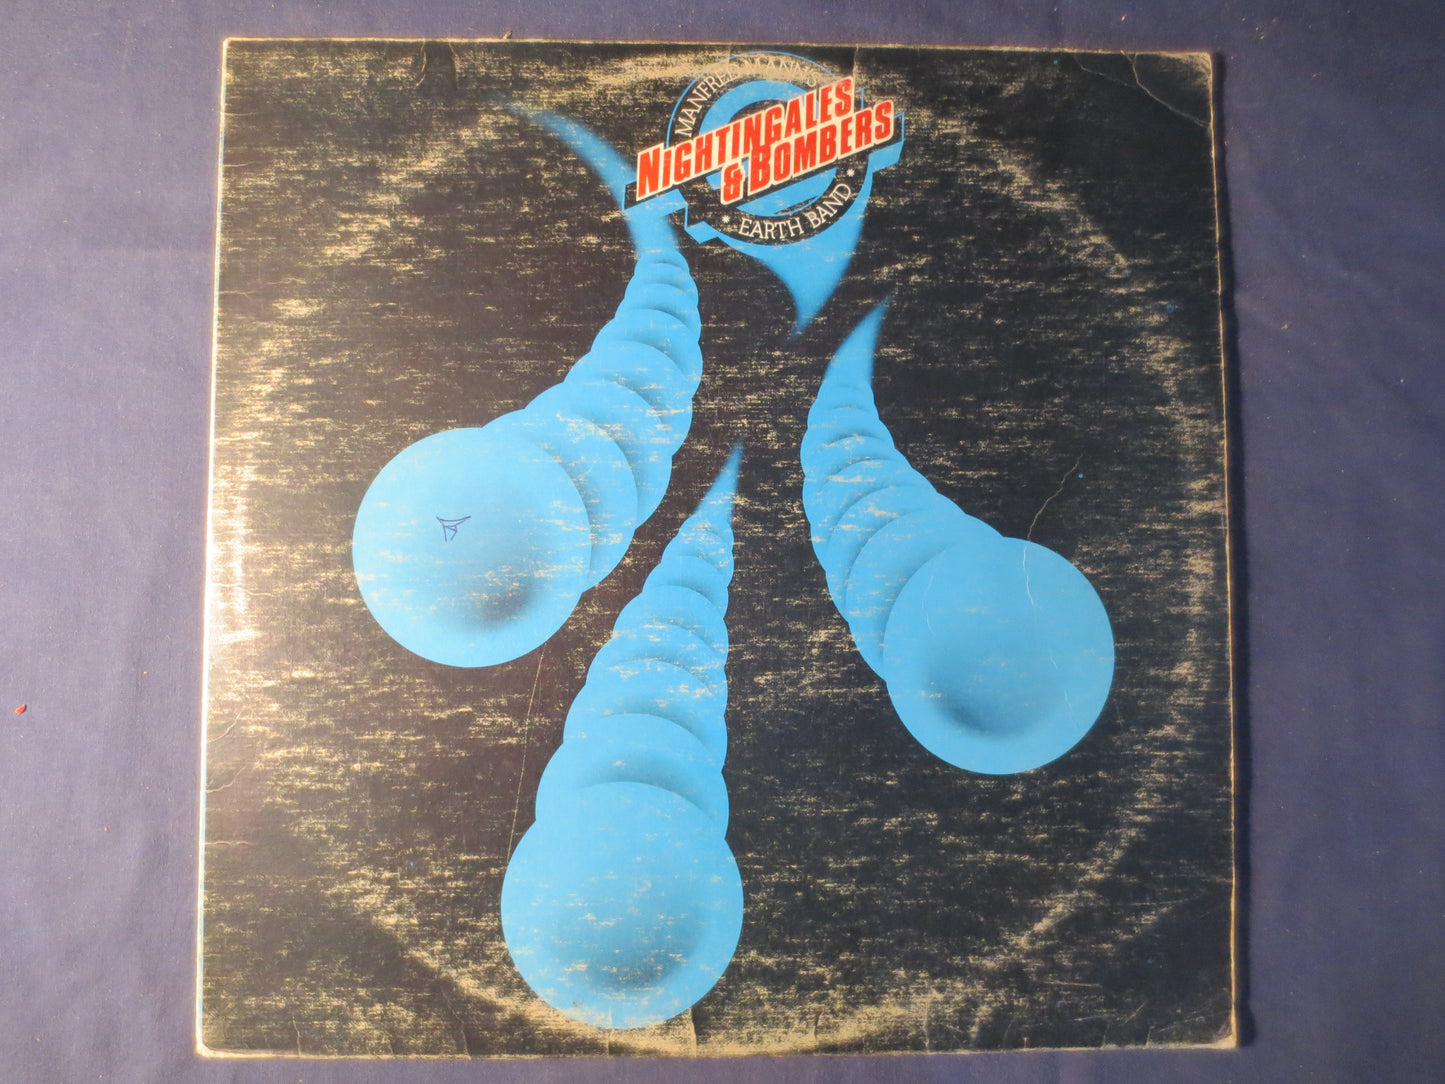 MANFRED MANN's EARTH Band, Nightingales and Bombers, Vintage Vinyl, Record Vinyl, Records, Vinyl Records, 1975 Records